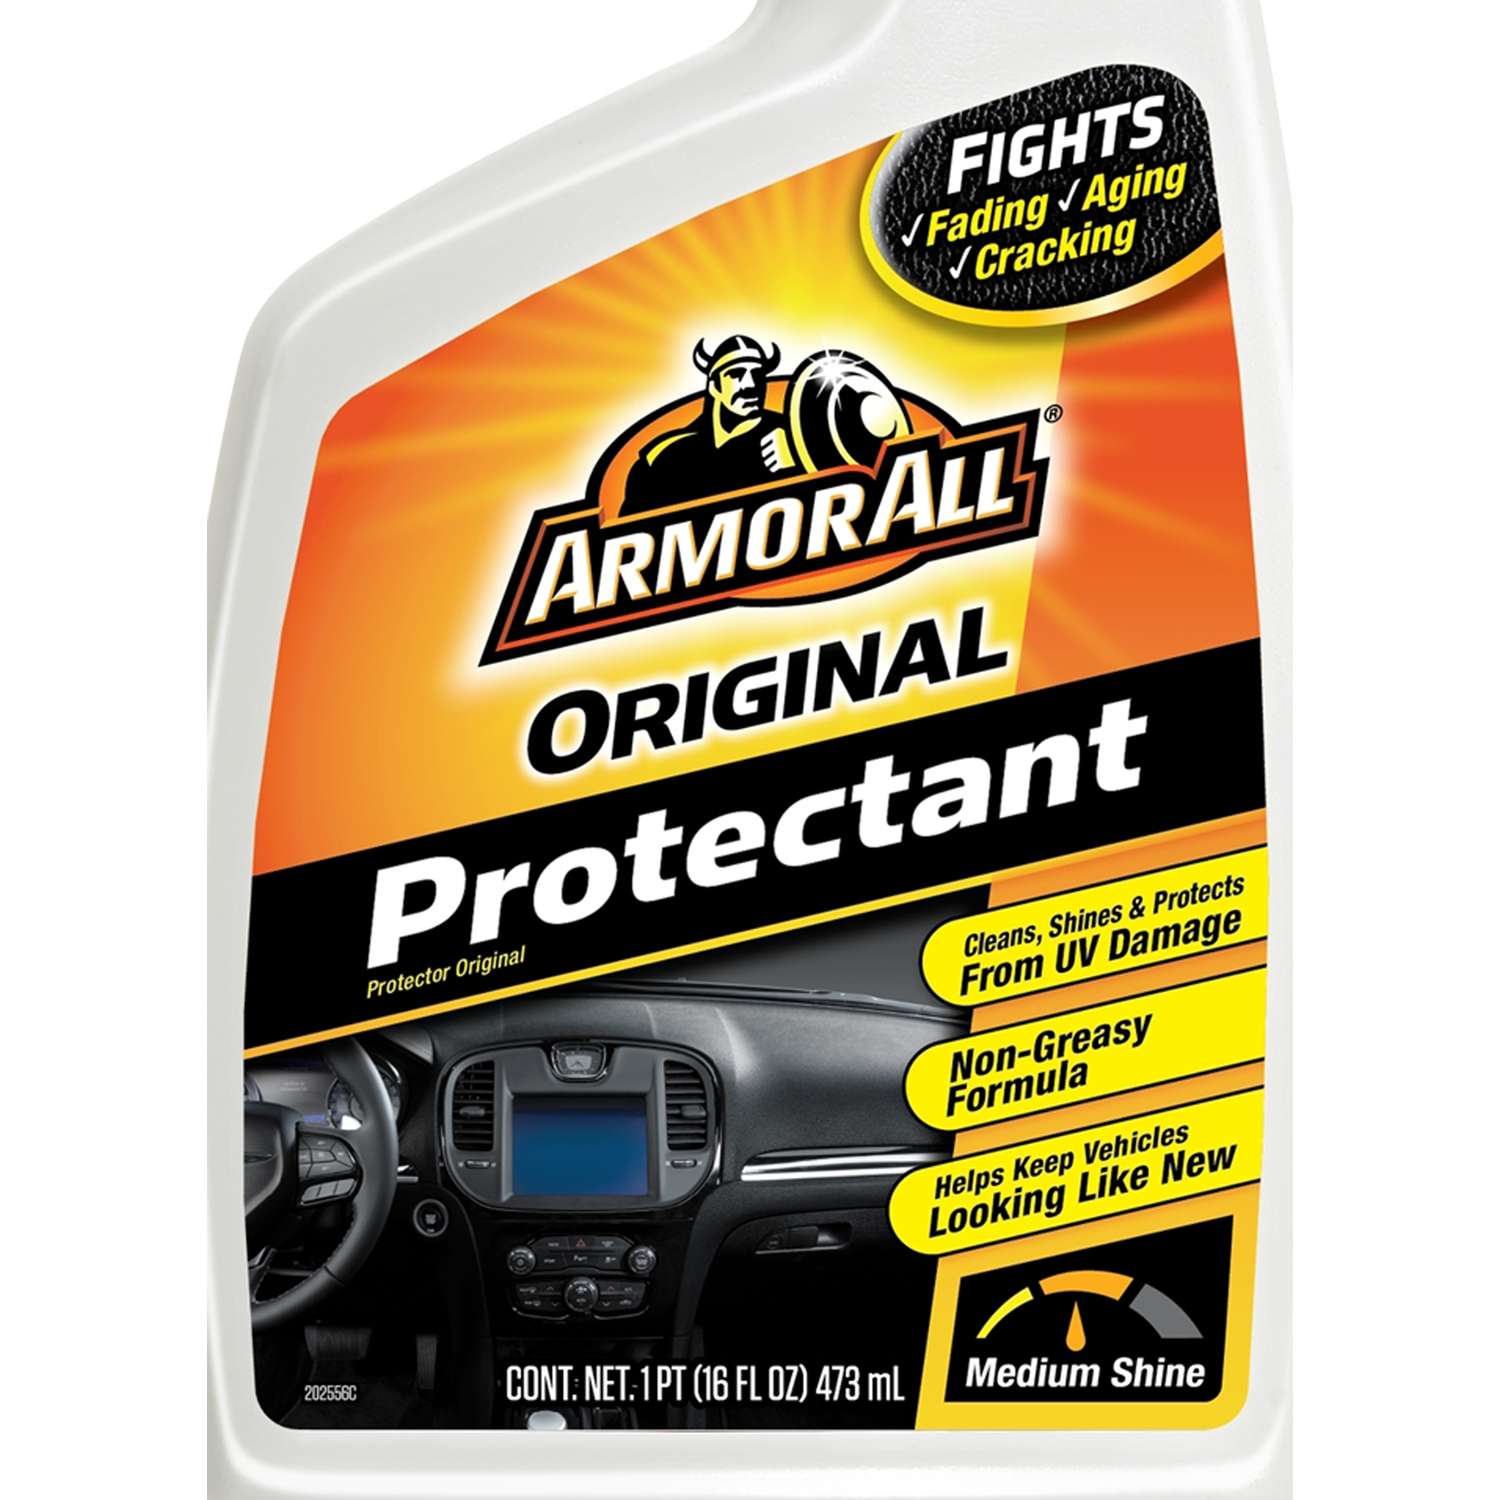 Armor All Protectant Spray- 2 Pack! Shines Vinyl, Rubber, Leather, and  Plastic